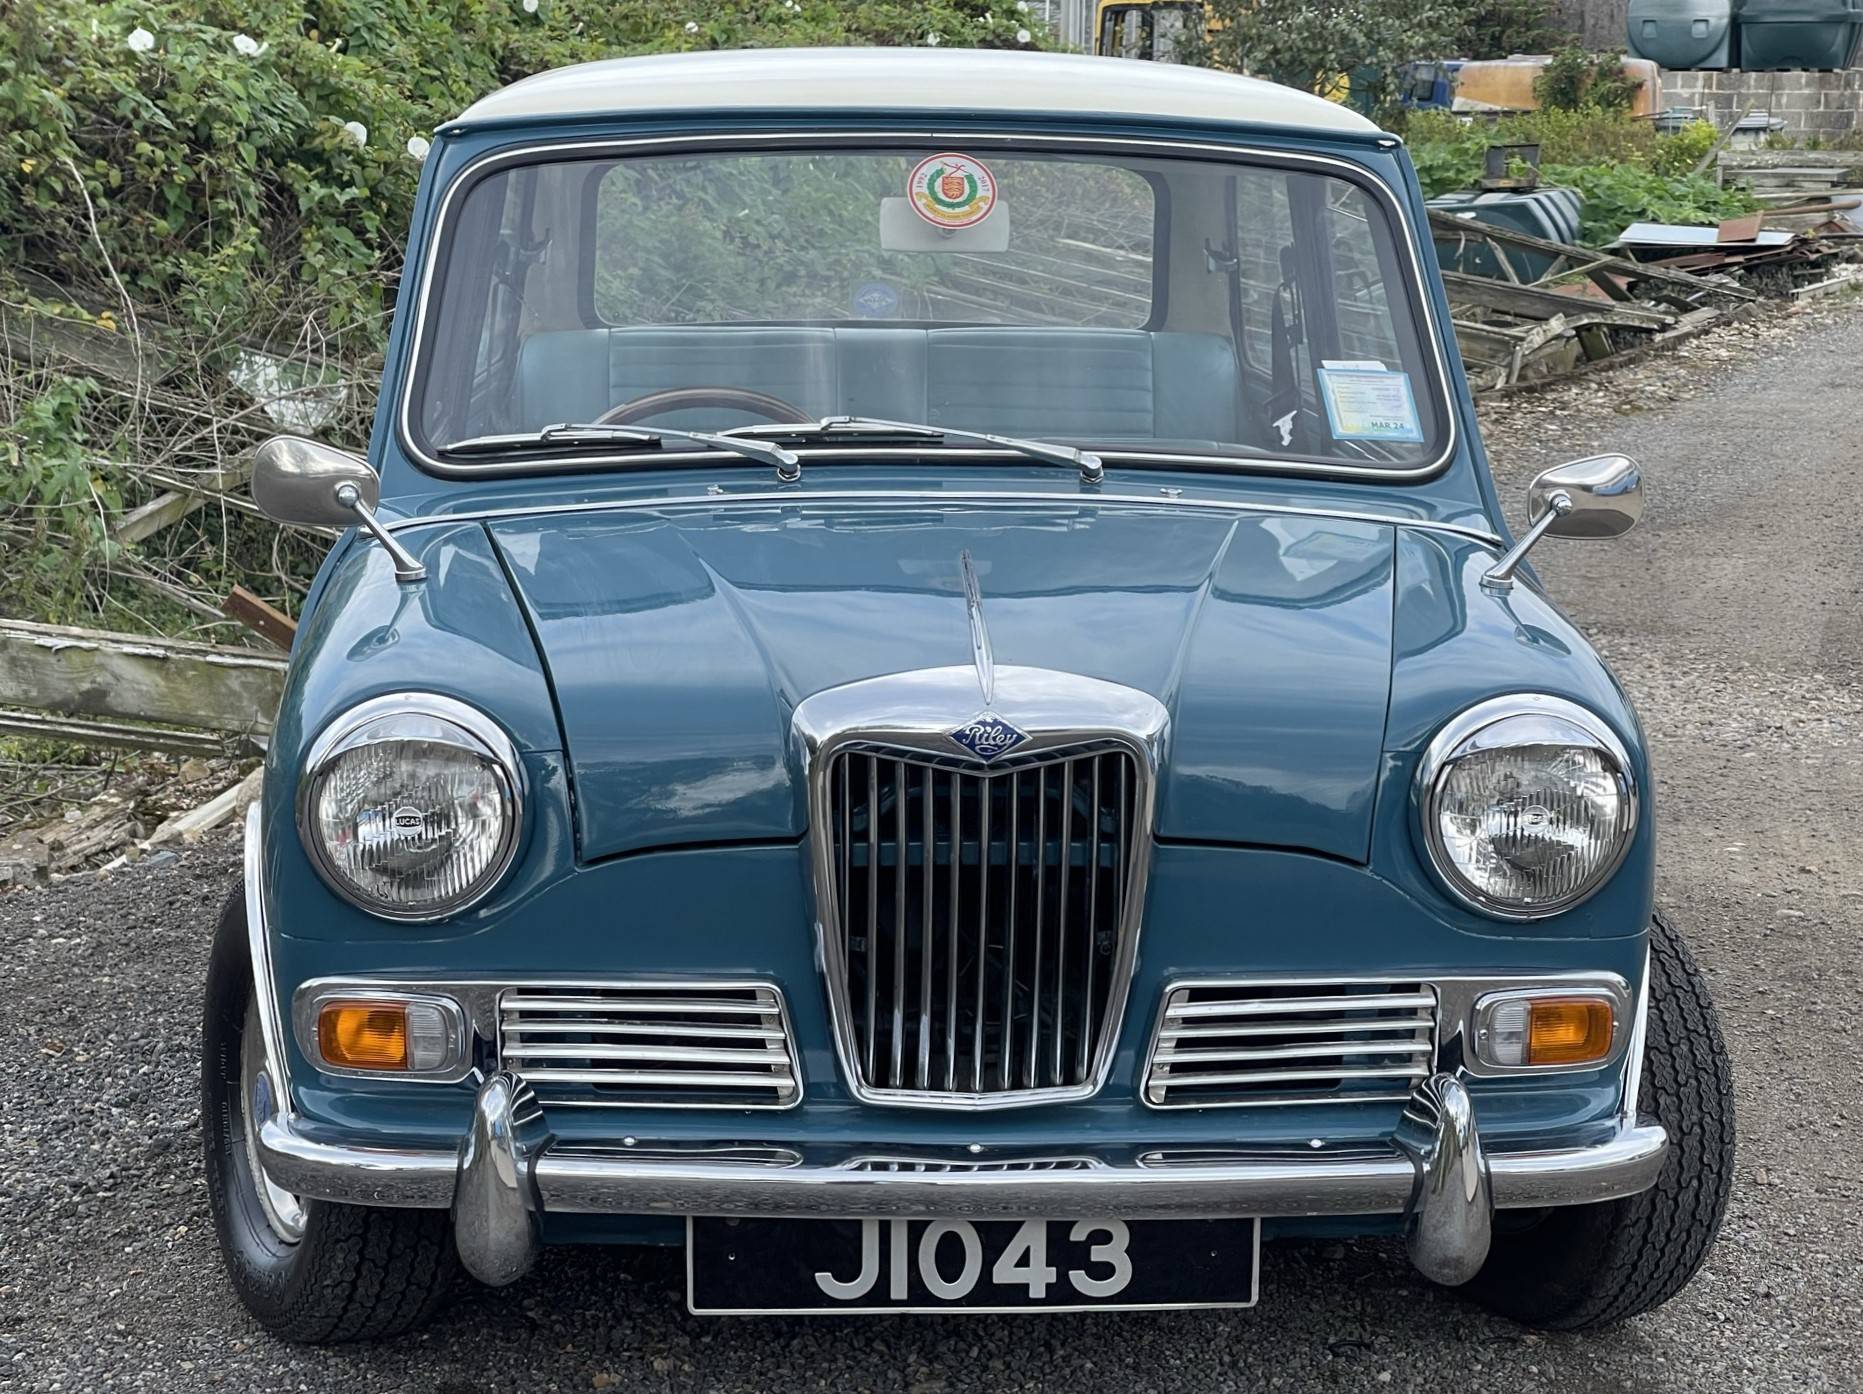 For Sale: Riley Elf Mark III (1969) offered for Price on request